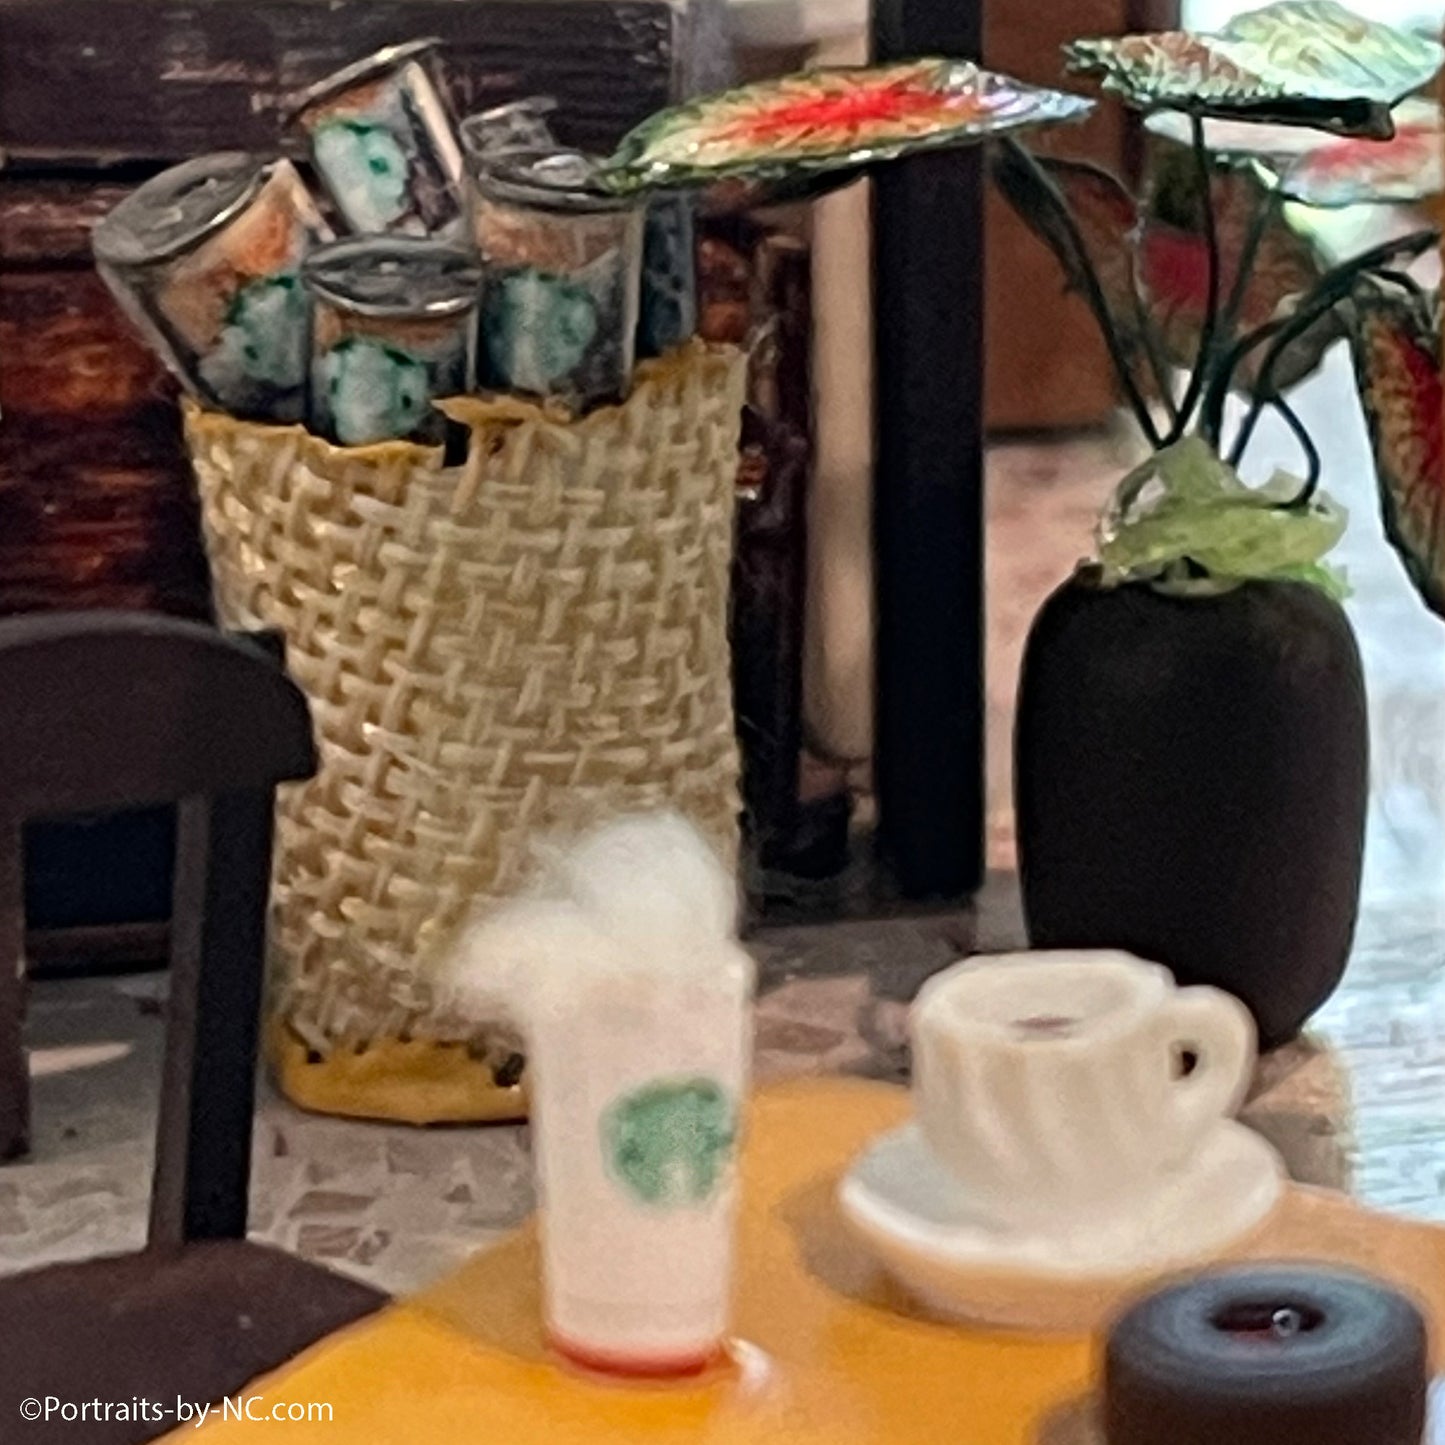 basket with drinks at starbucks